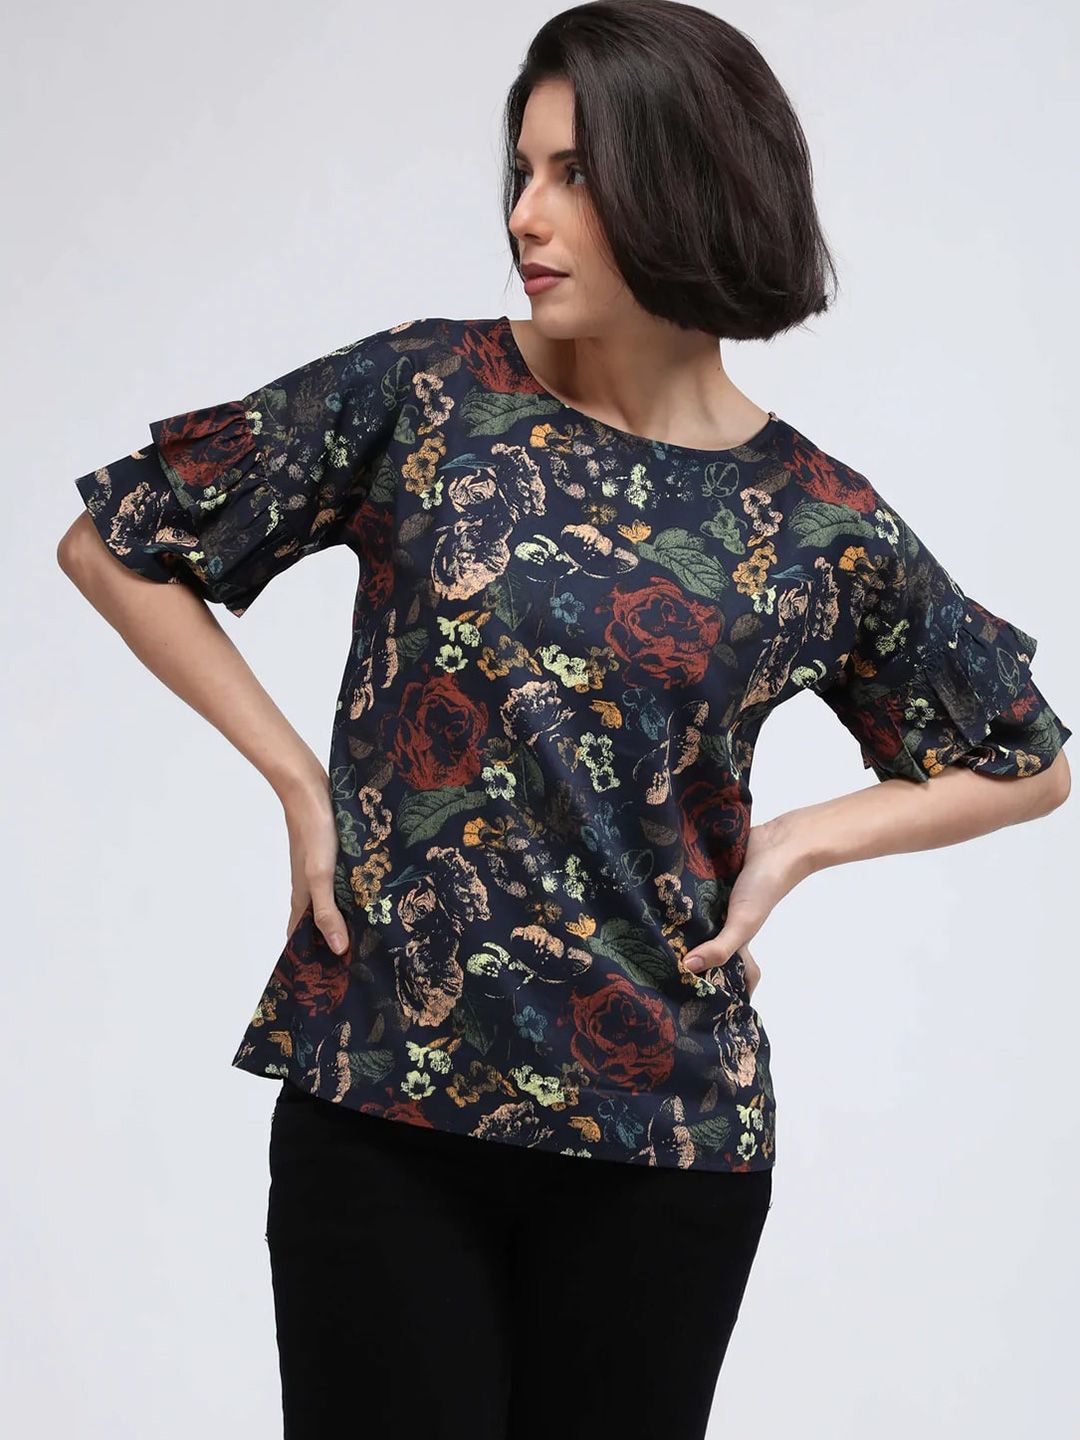 IDK Floral Printed Top Price in India